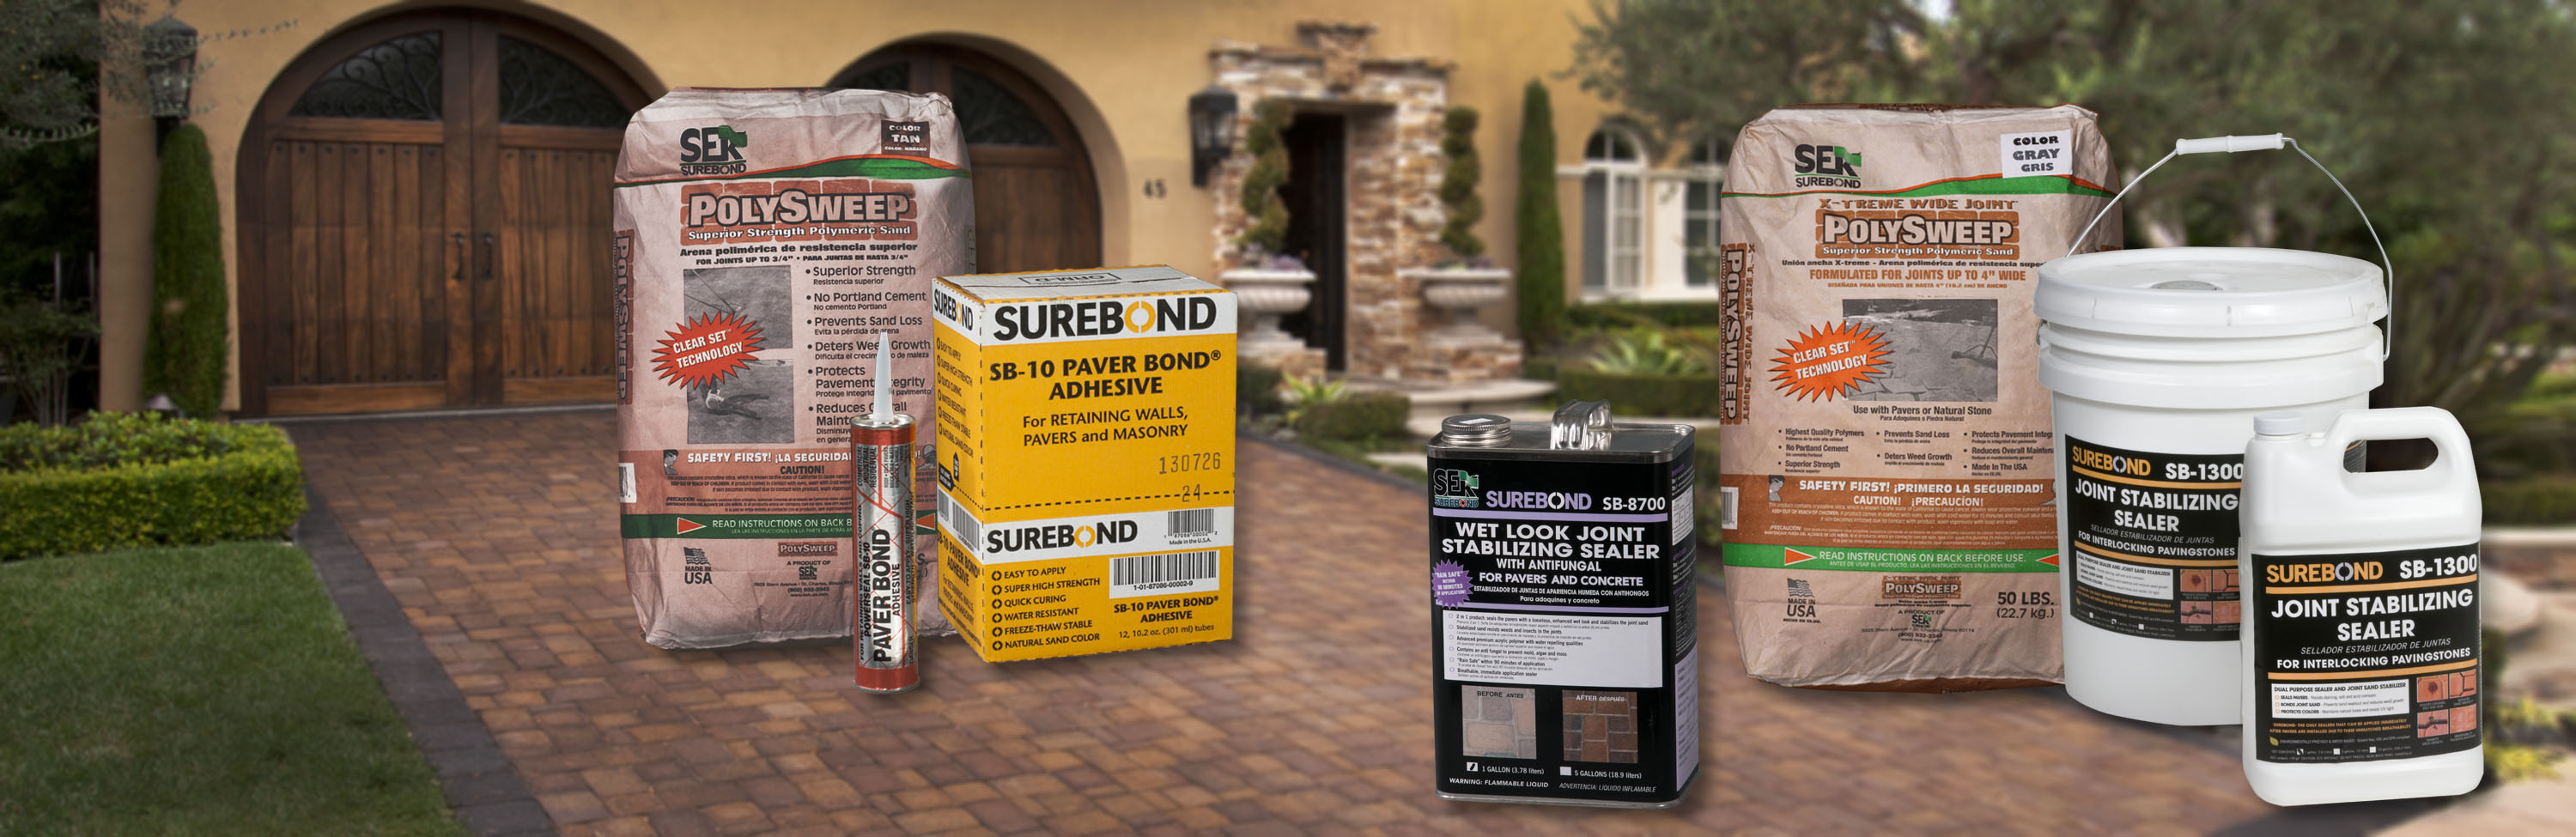 Photograph of SureBond paver joint sand and sealers